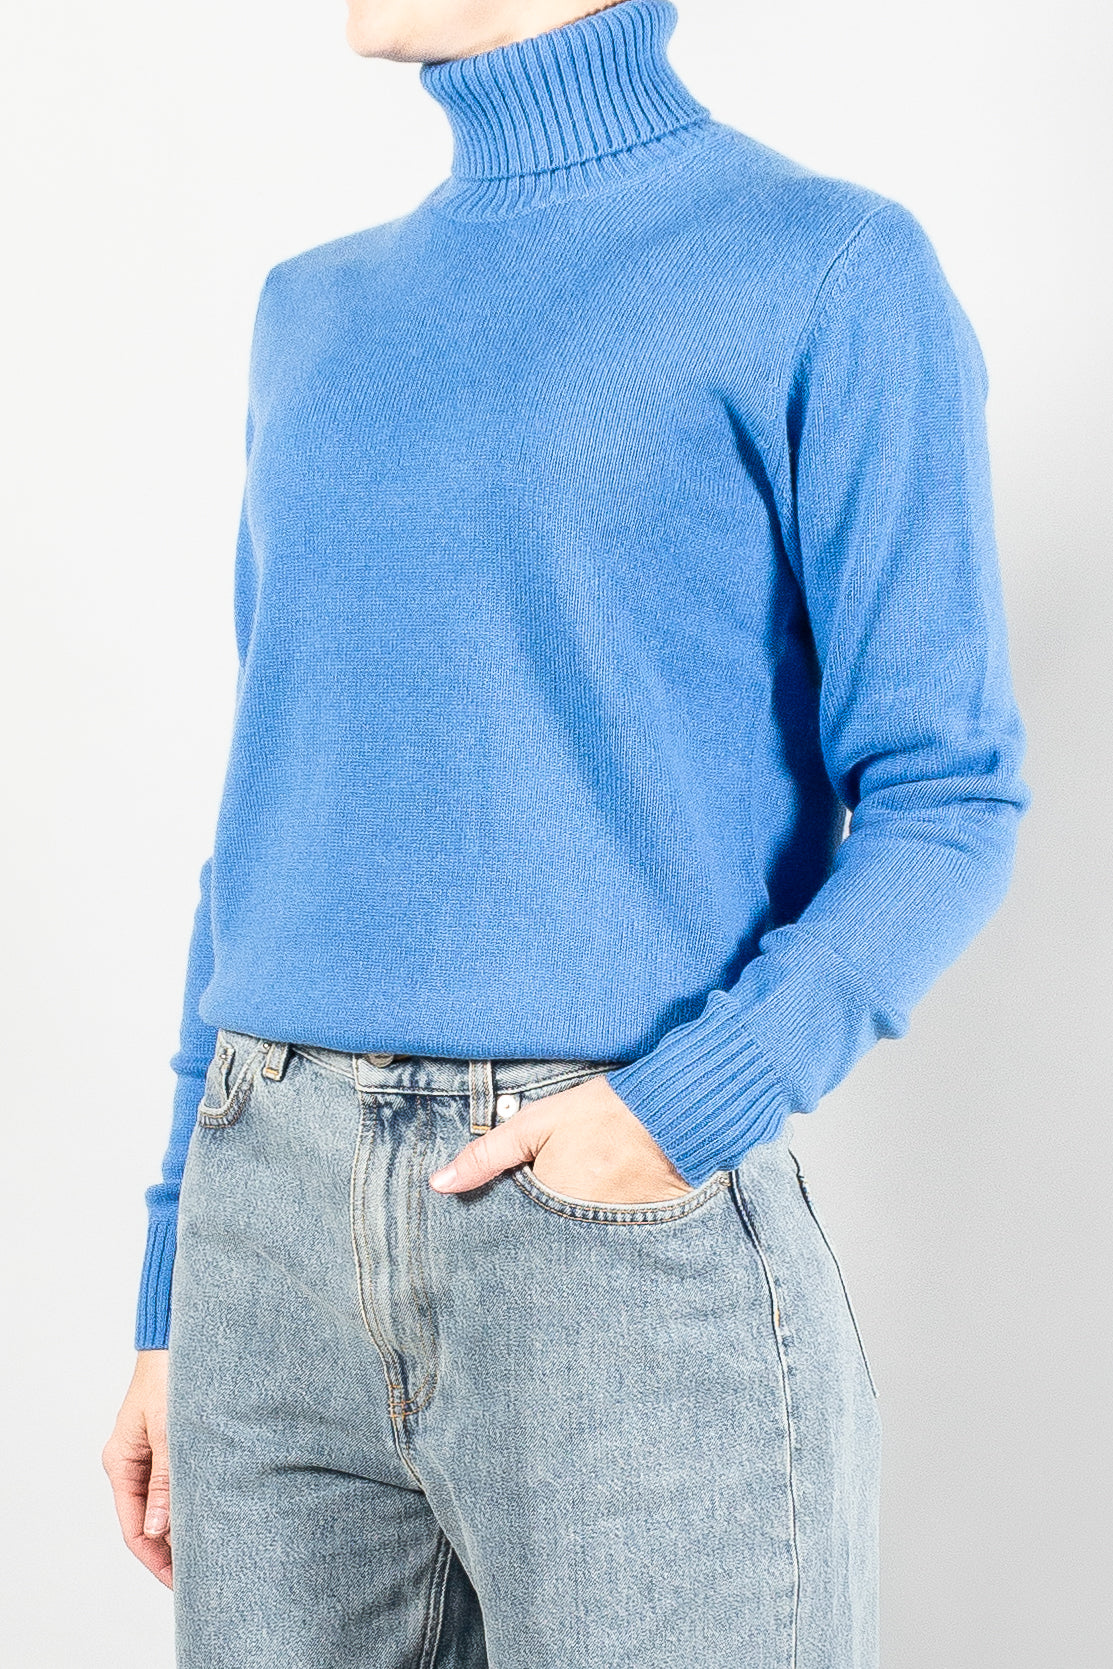 Closed Roll Neck Long Sleeve-Tops-Misch-Boutique-Vancouver-Canada-misch.ca